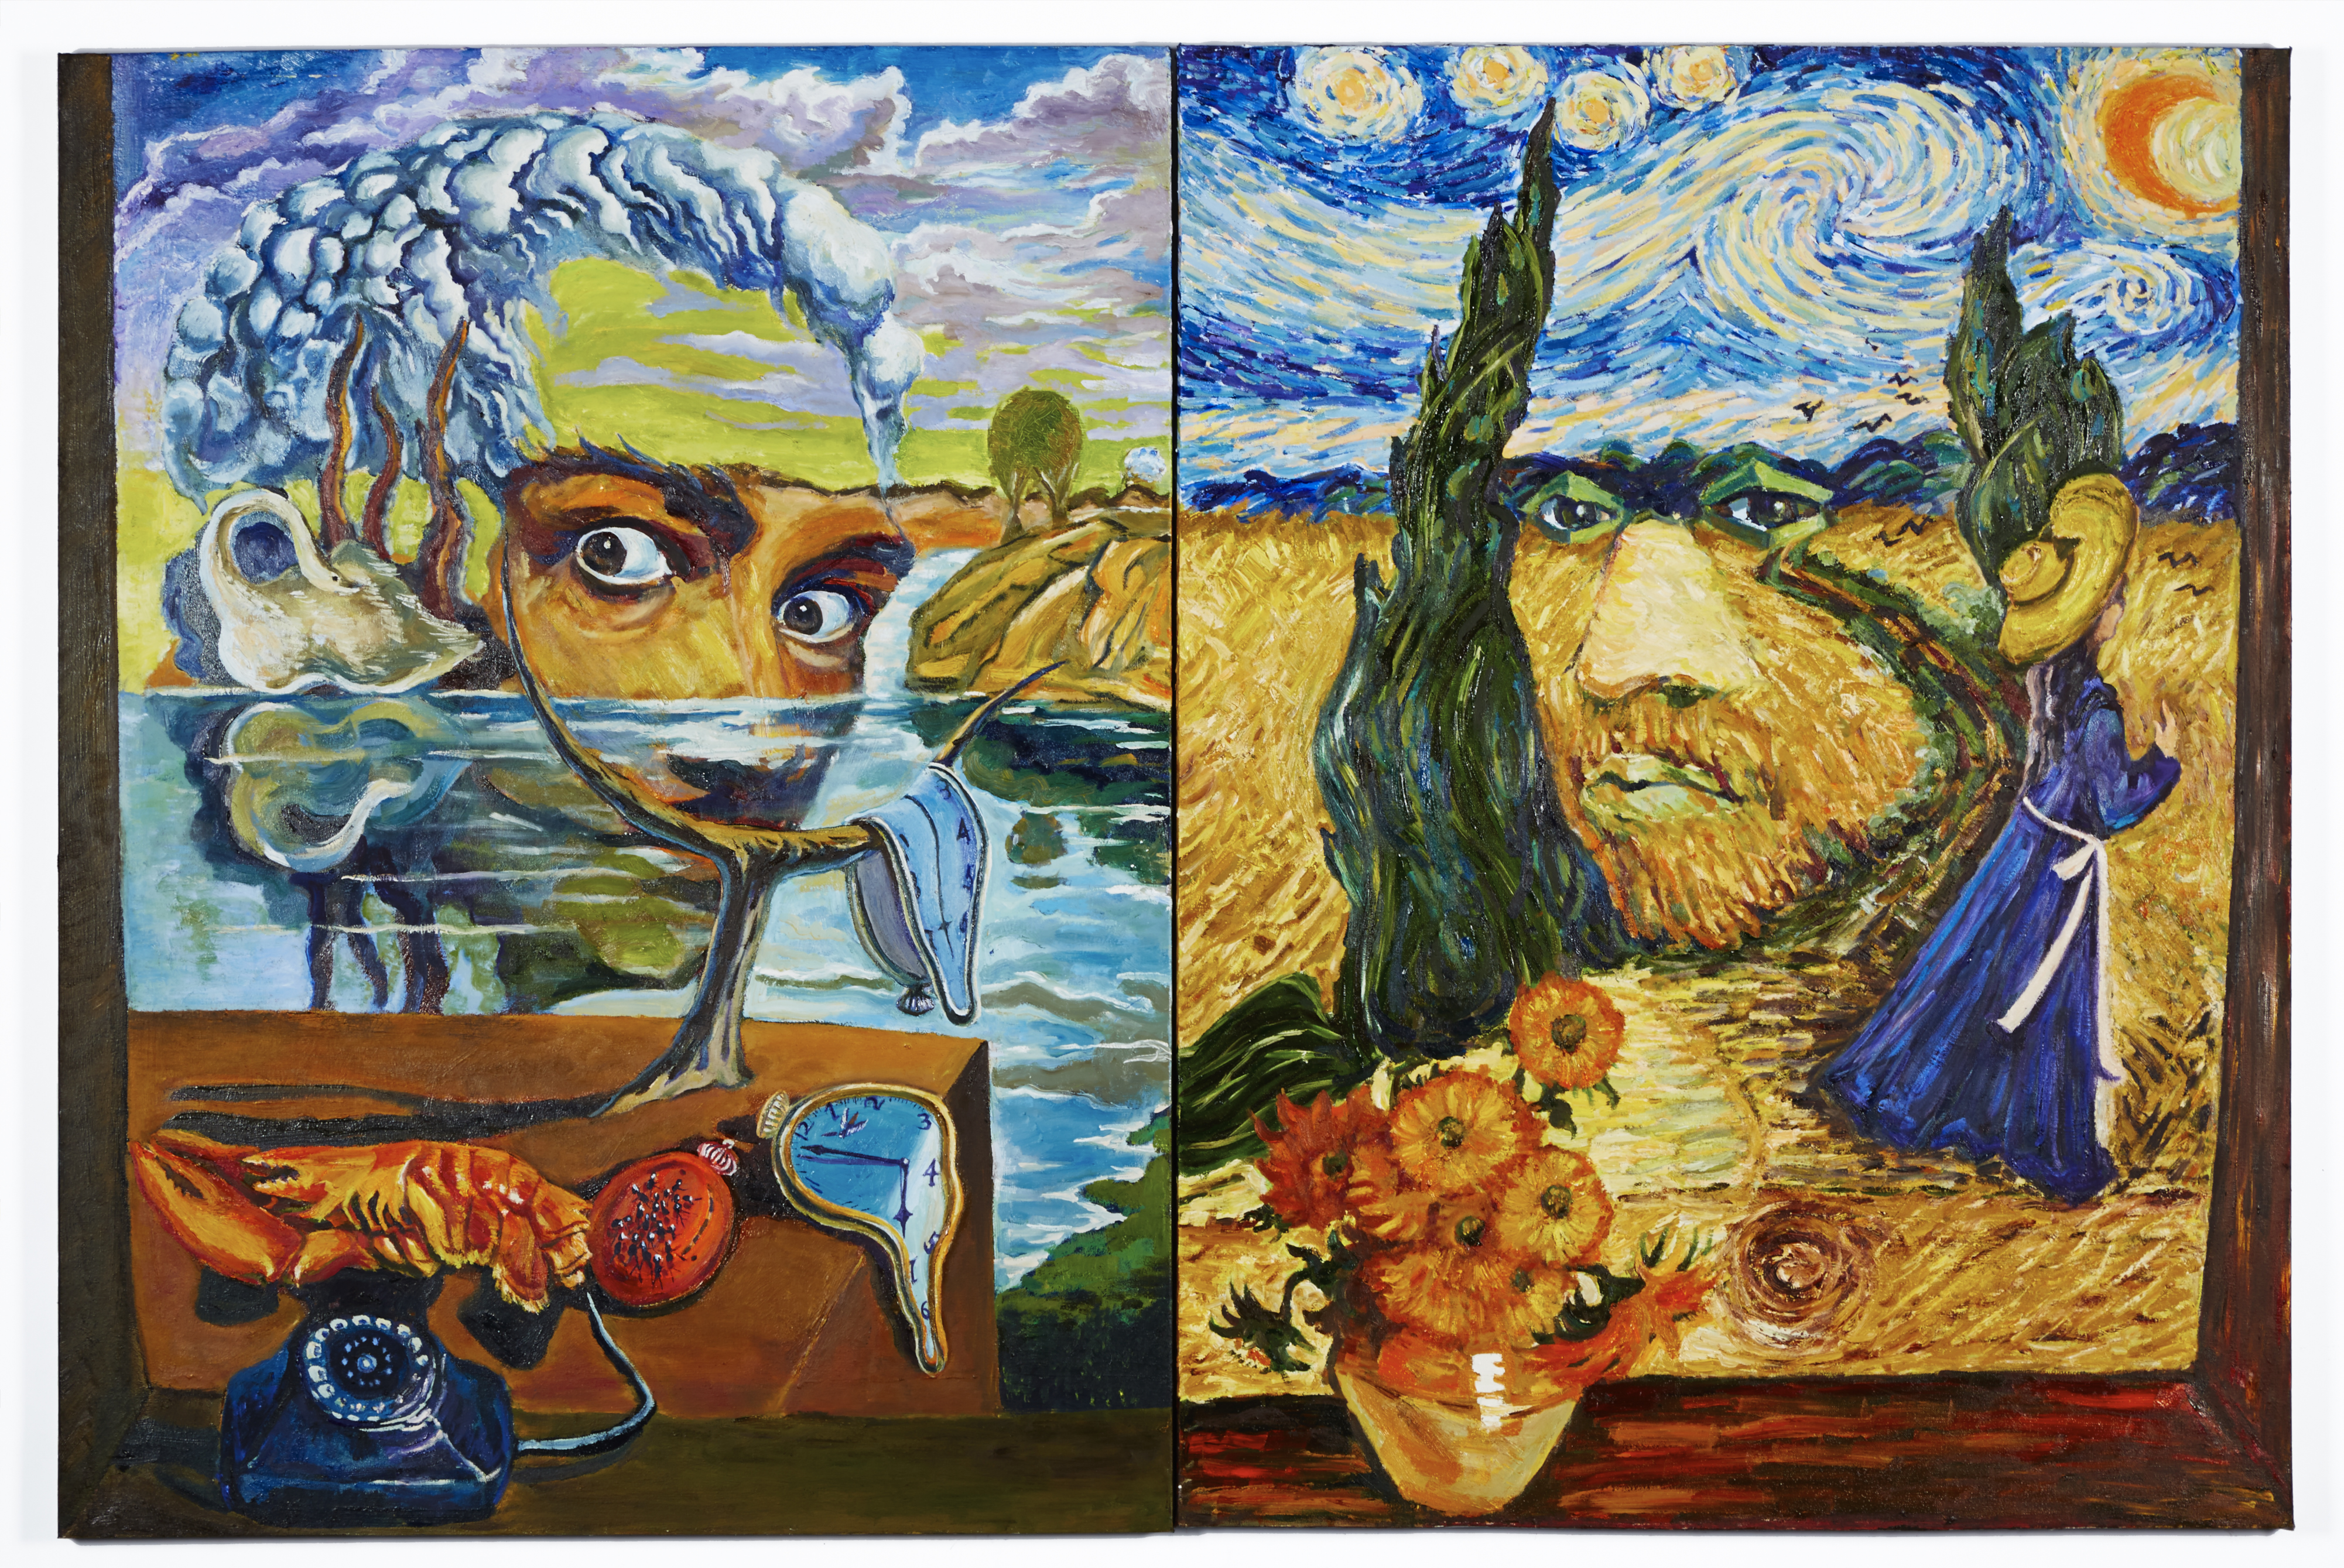 Portraits of artists Salvador Dali and Vincent Van Gough painted in the style of their most famous paintings.